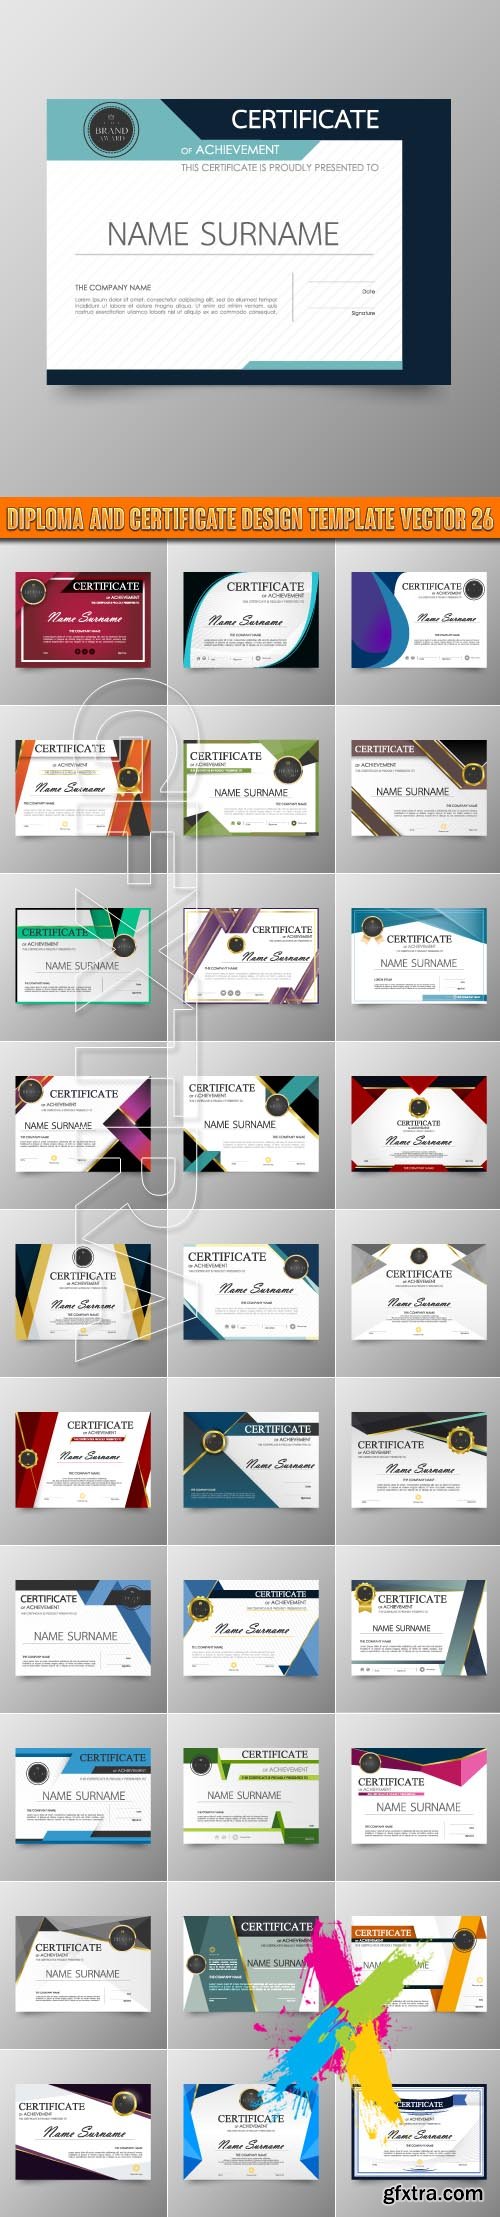 Diploma and certificate design template vector 26